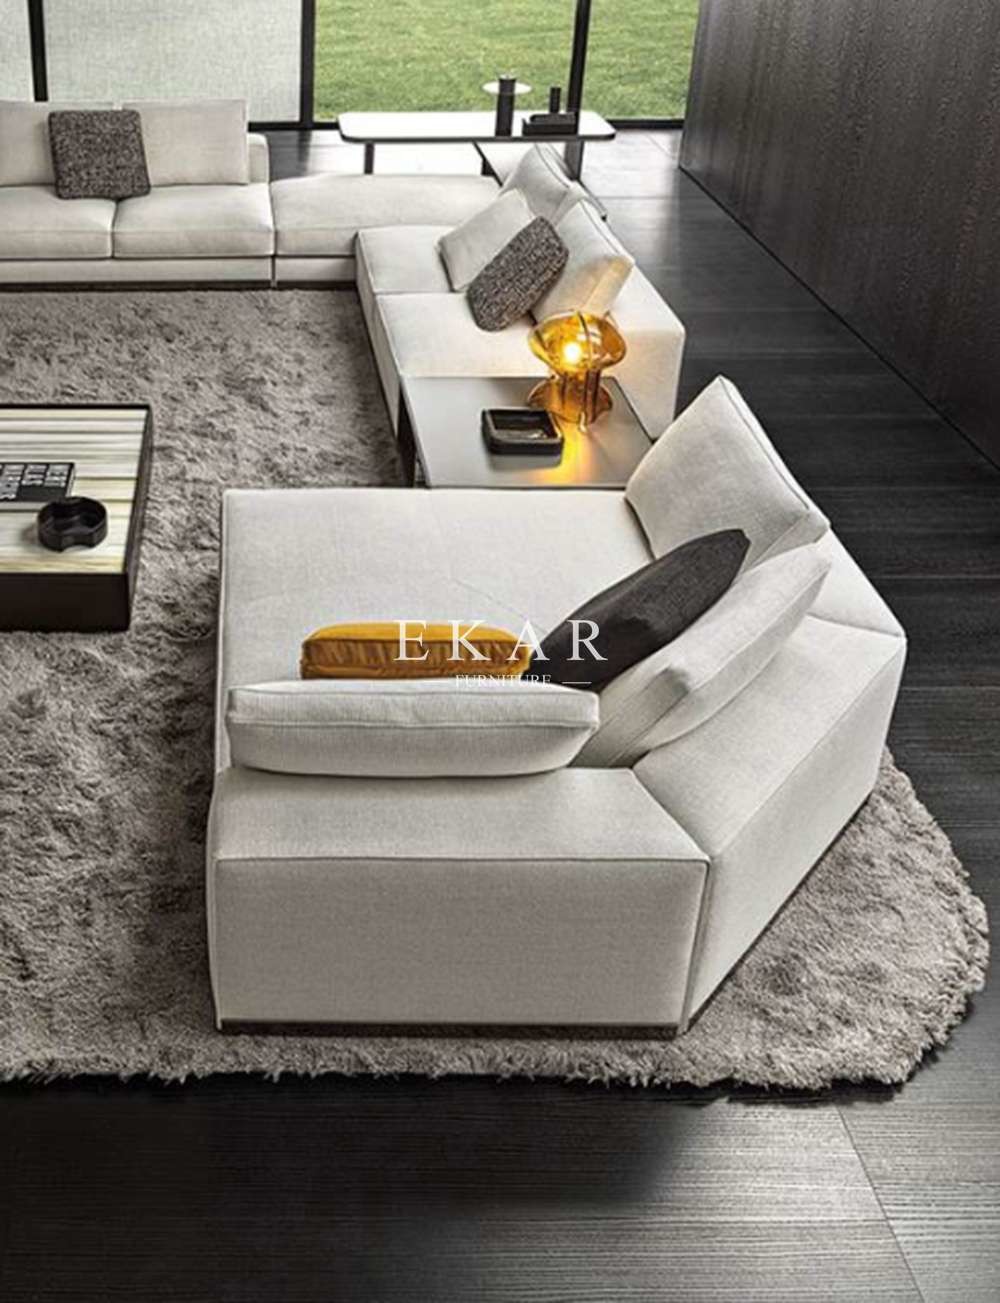 China Contemporary Modern Design Fabric Corner L Shaped Sectional Sofa wholesale